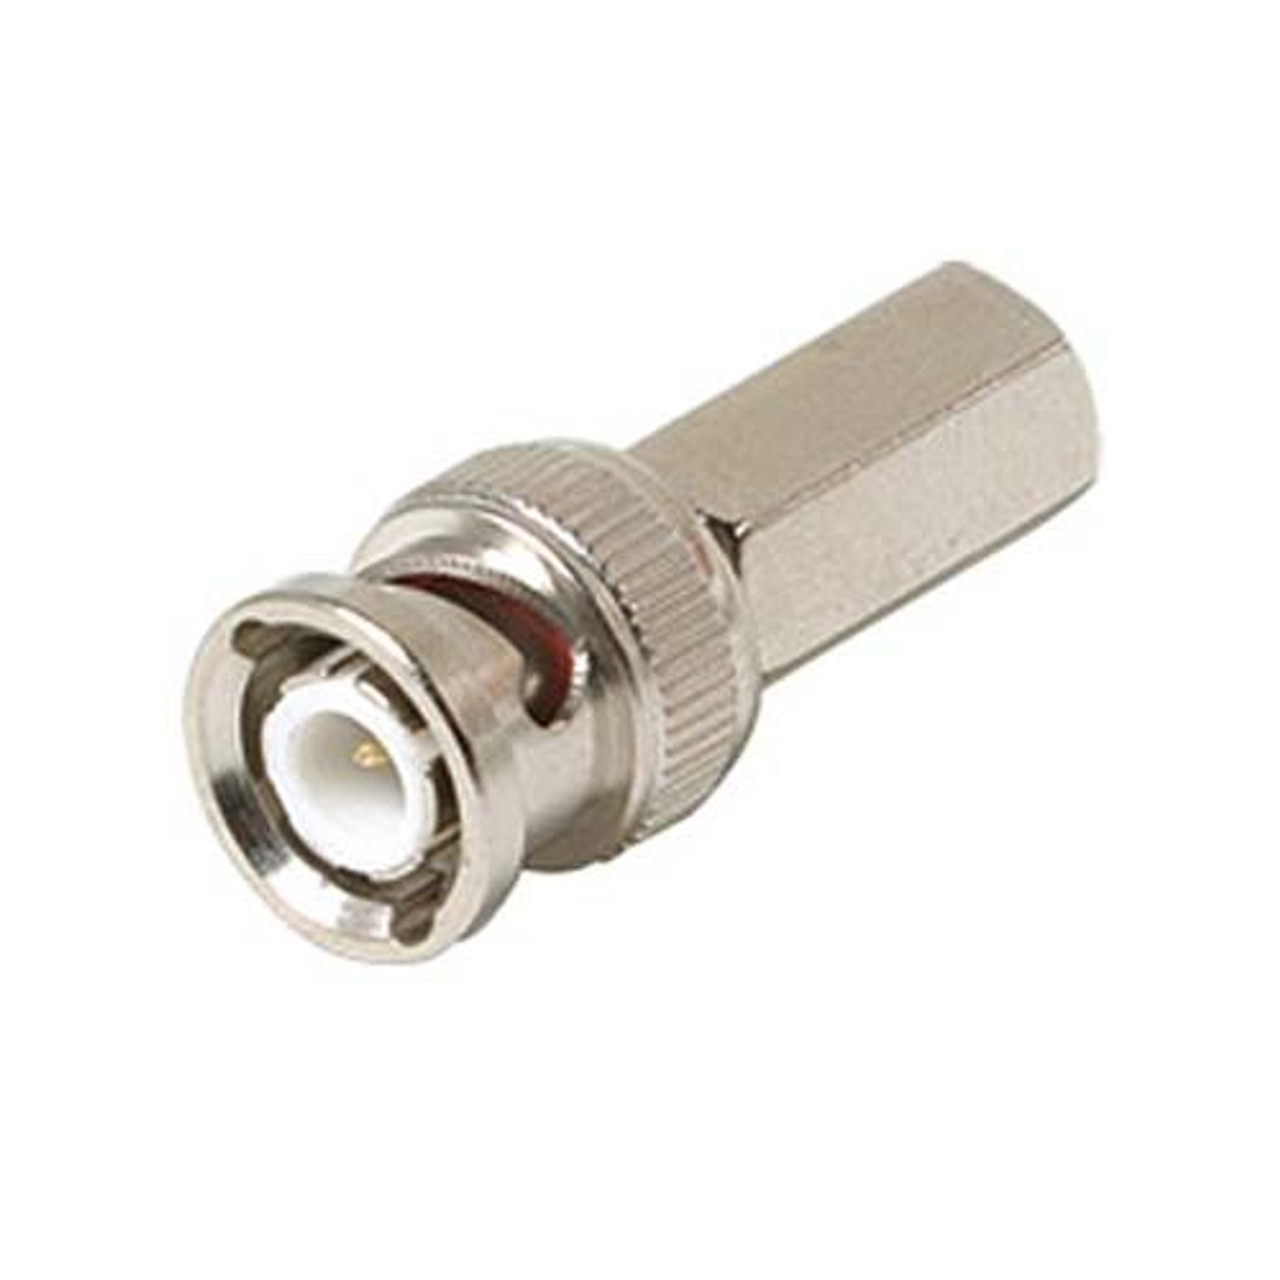 Steren 200-122-10 BNC to RG6 Twist-On Coaxial Cable Connector RG-6 Adapter Connector Audio Video Data Signal Component Device Communication 10 Pack